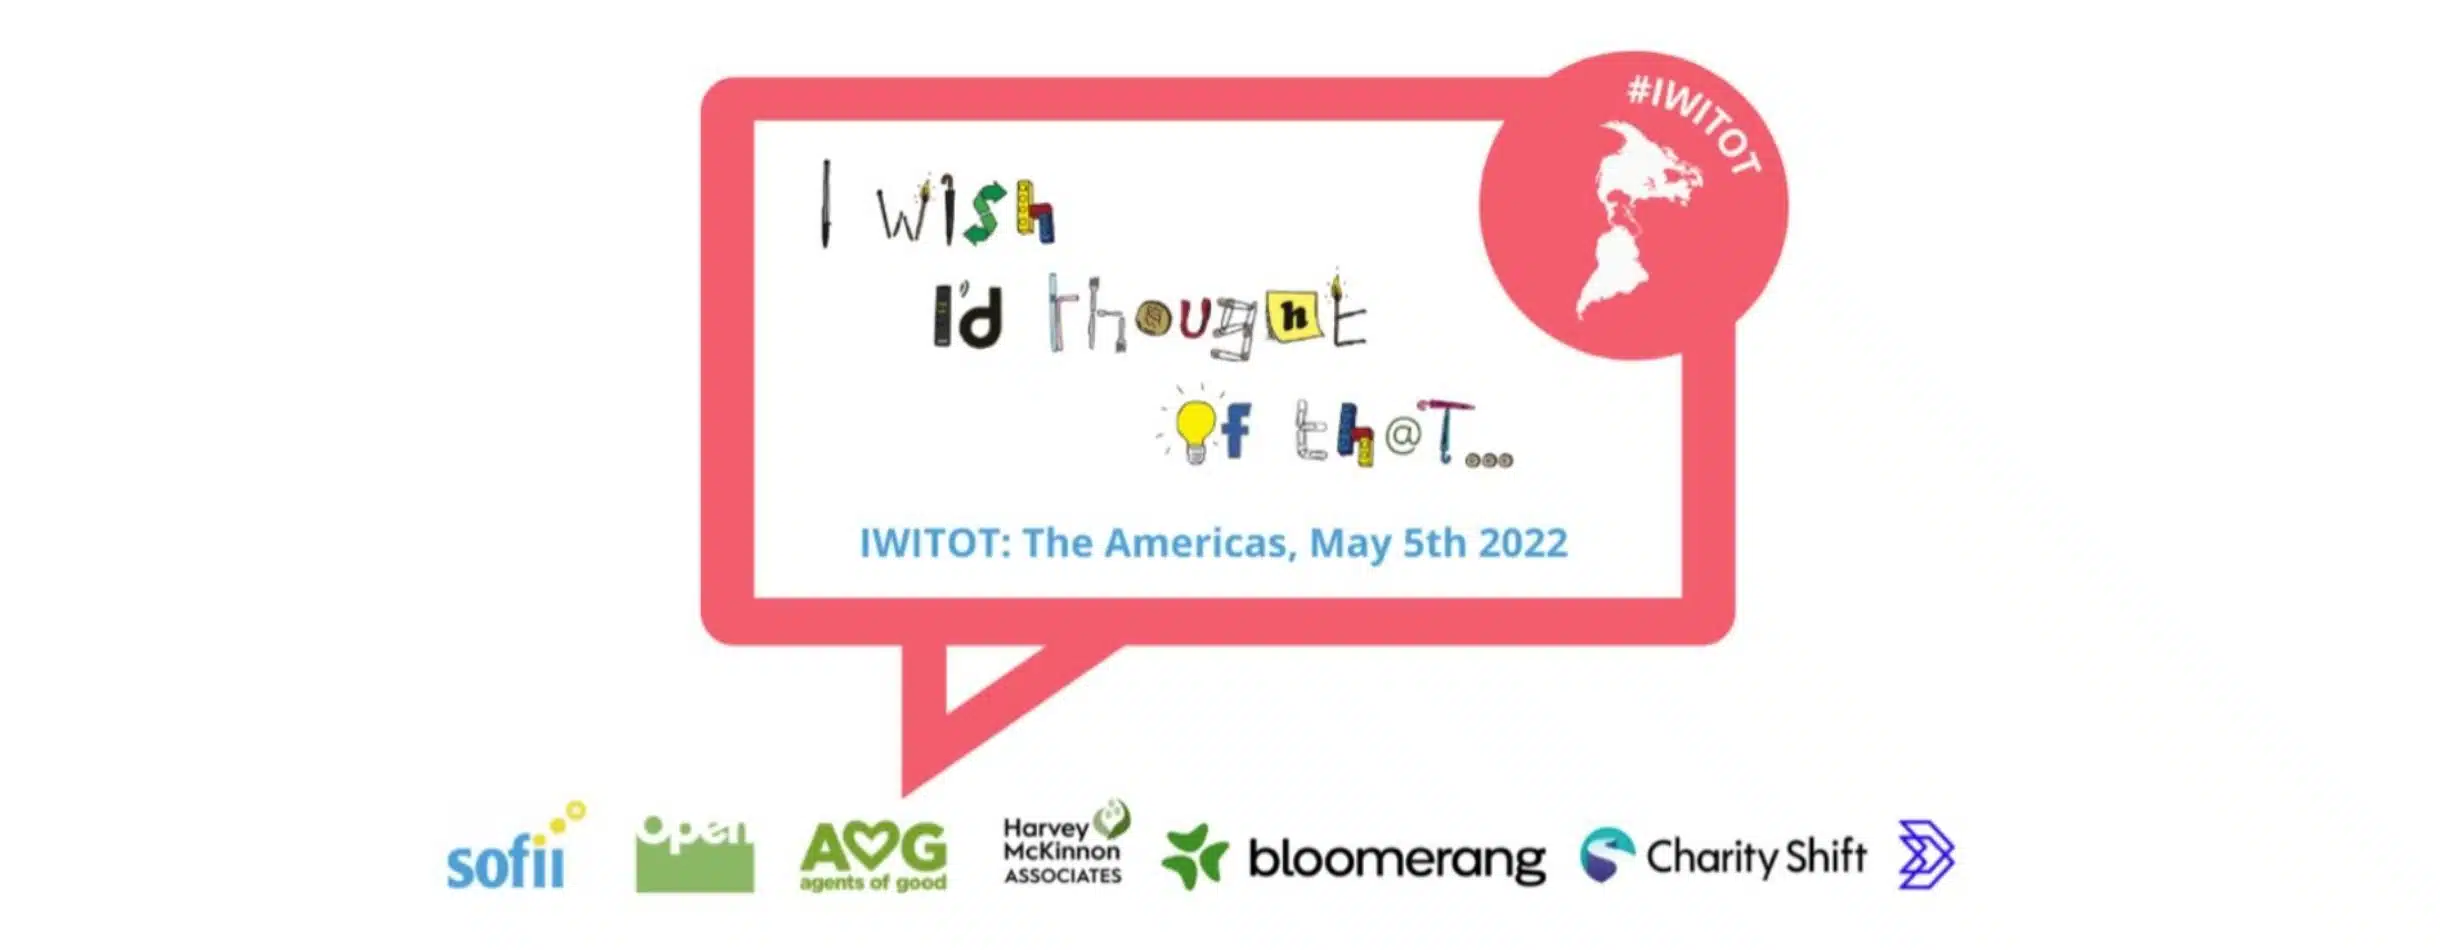 The logo for the the IWITOT event with I Wish Id Thought of That displayed